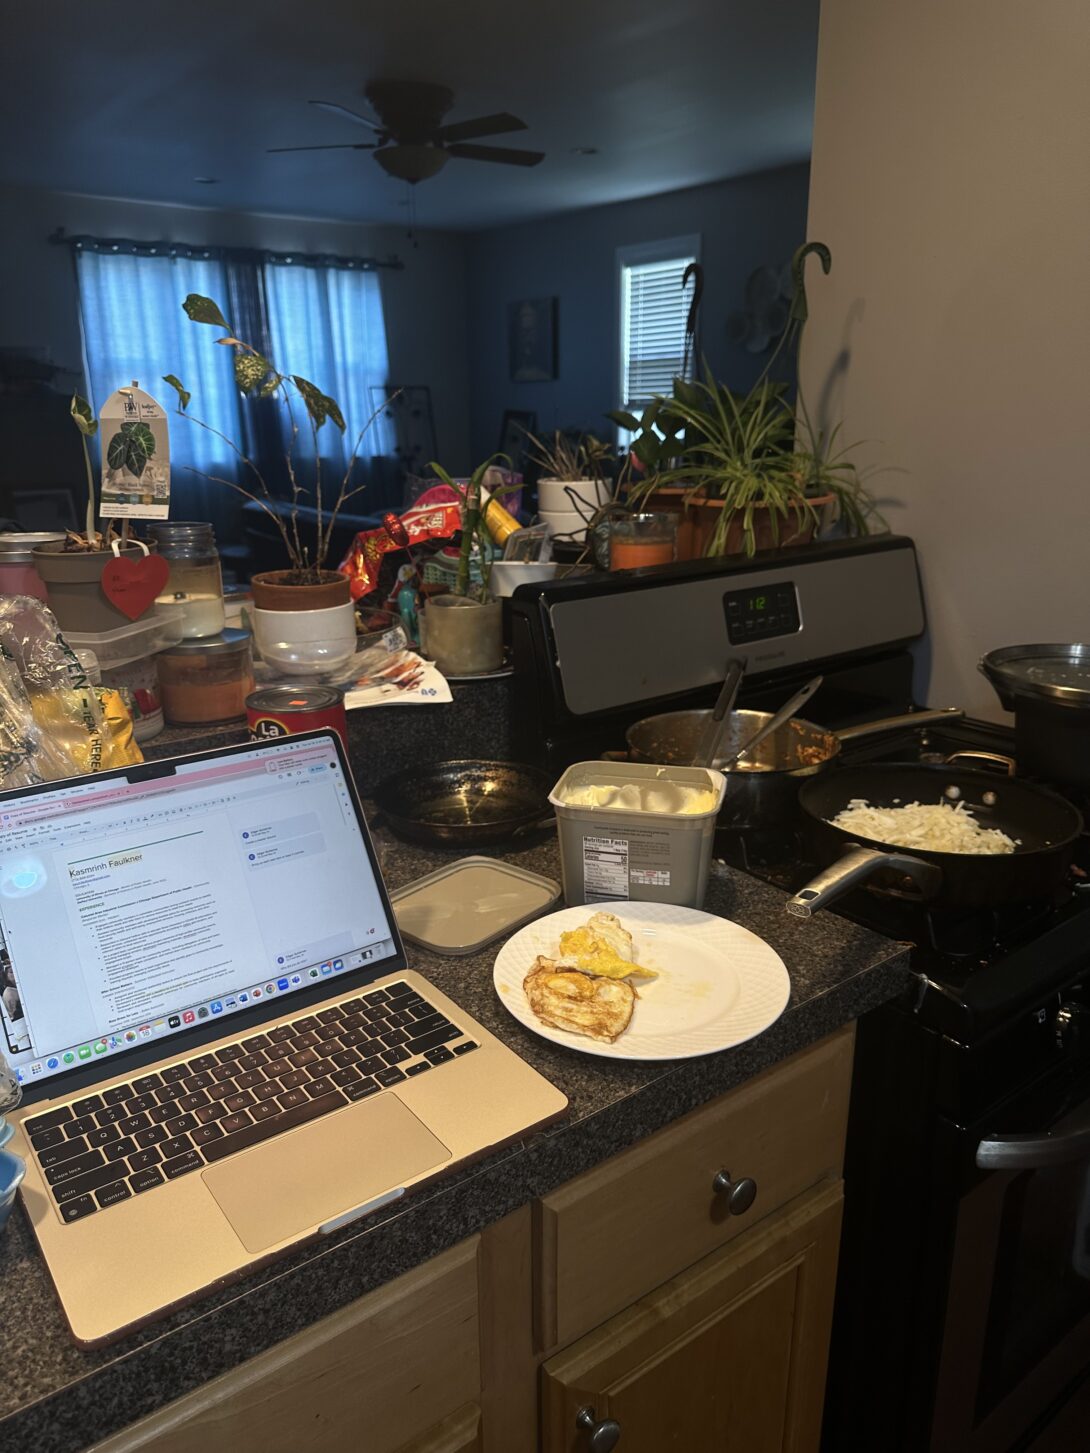 A cluttered kitchen counter of a multi-tasking student